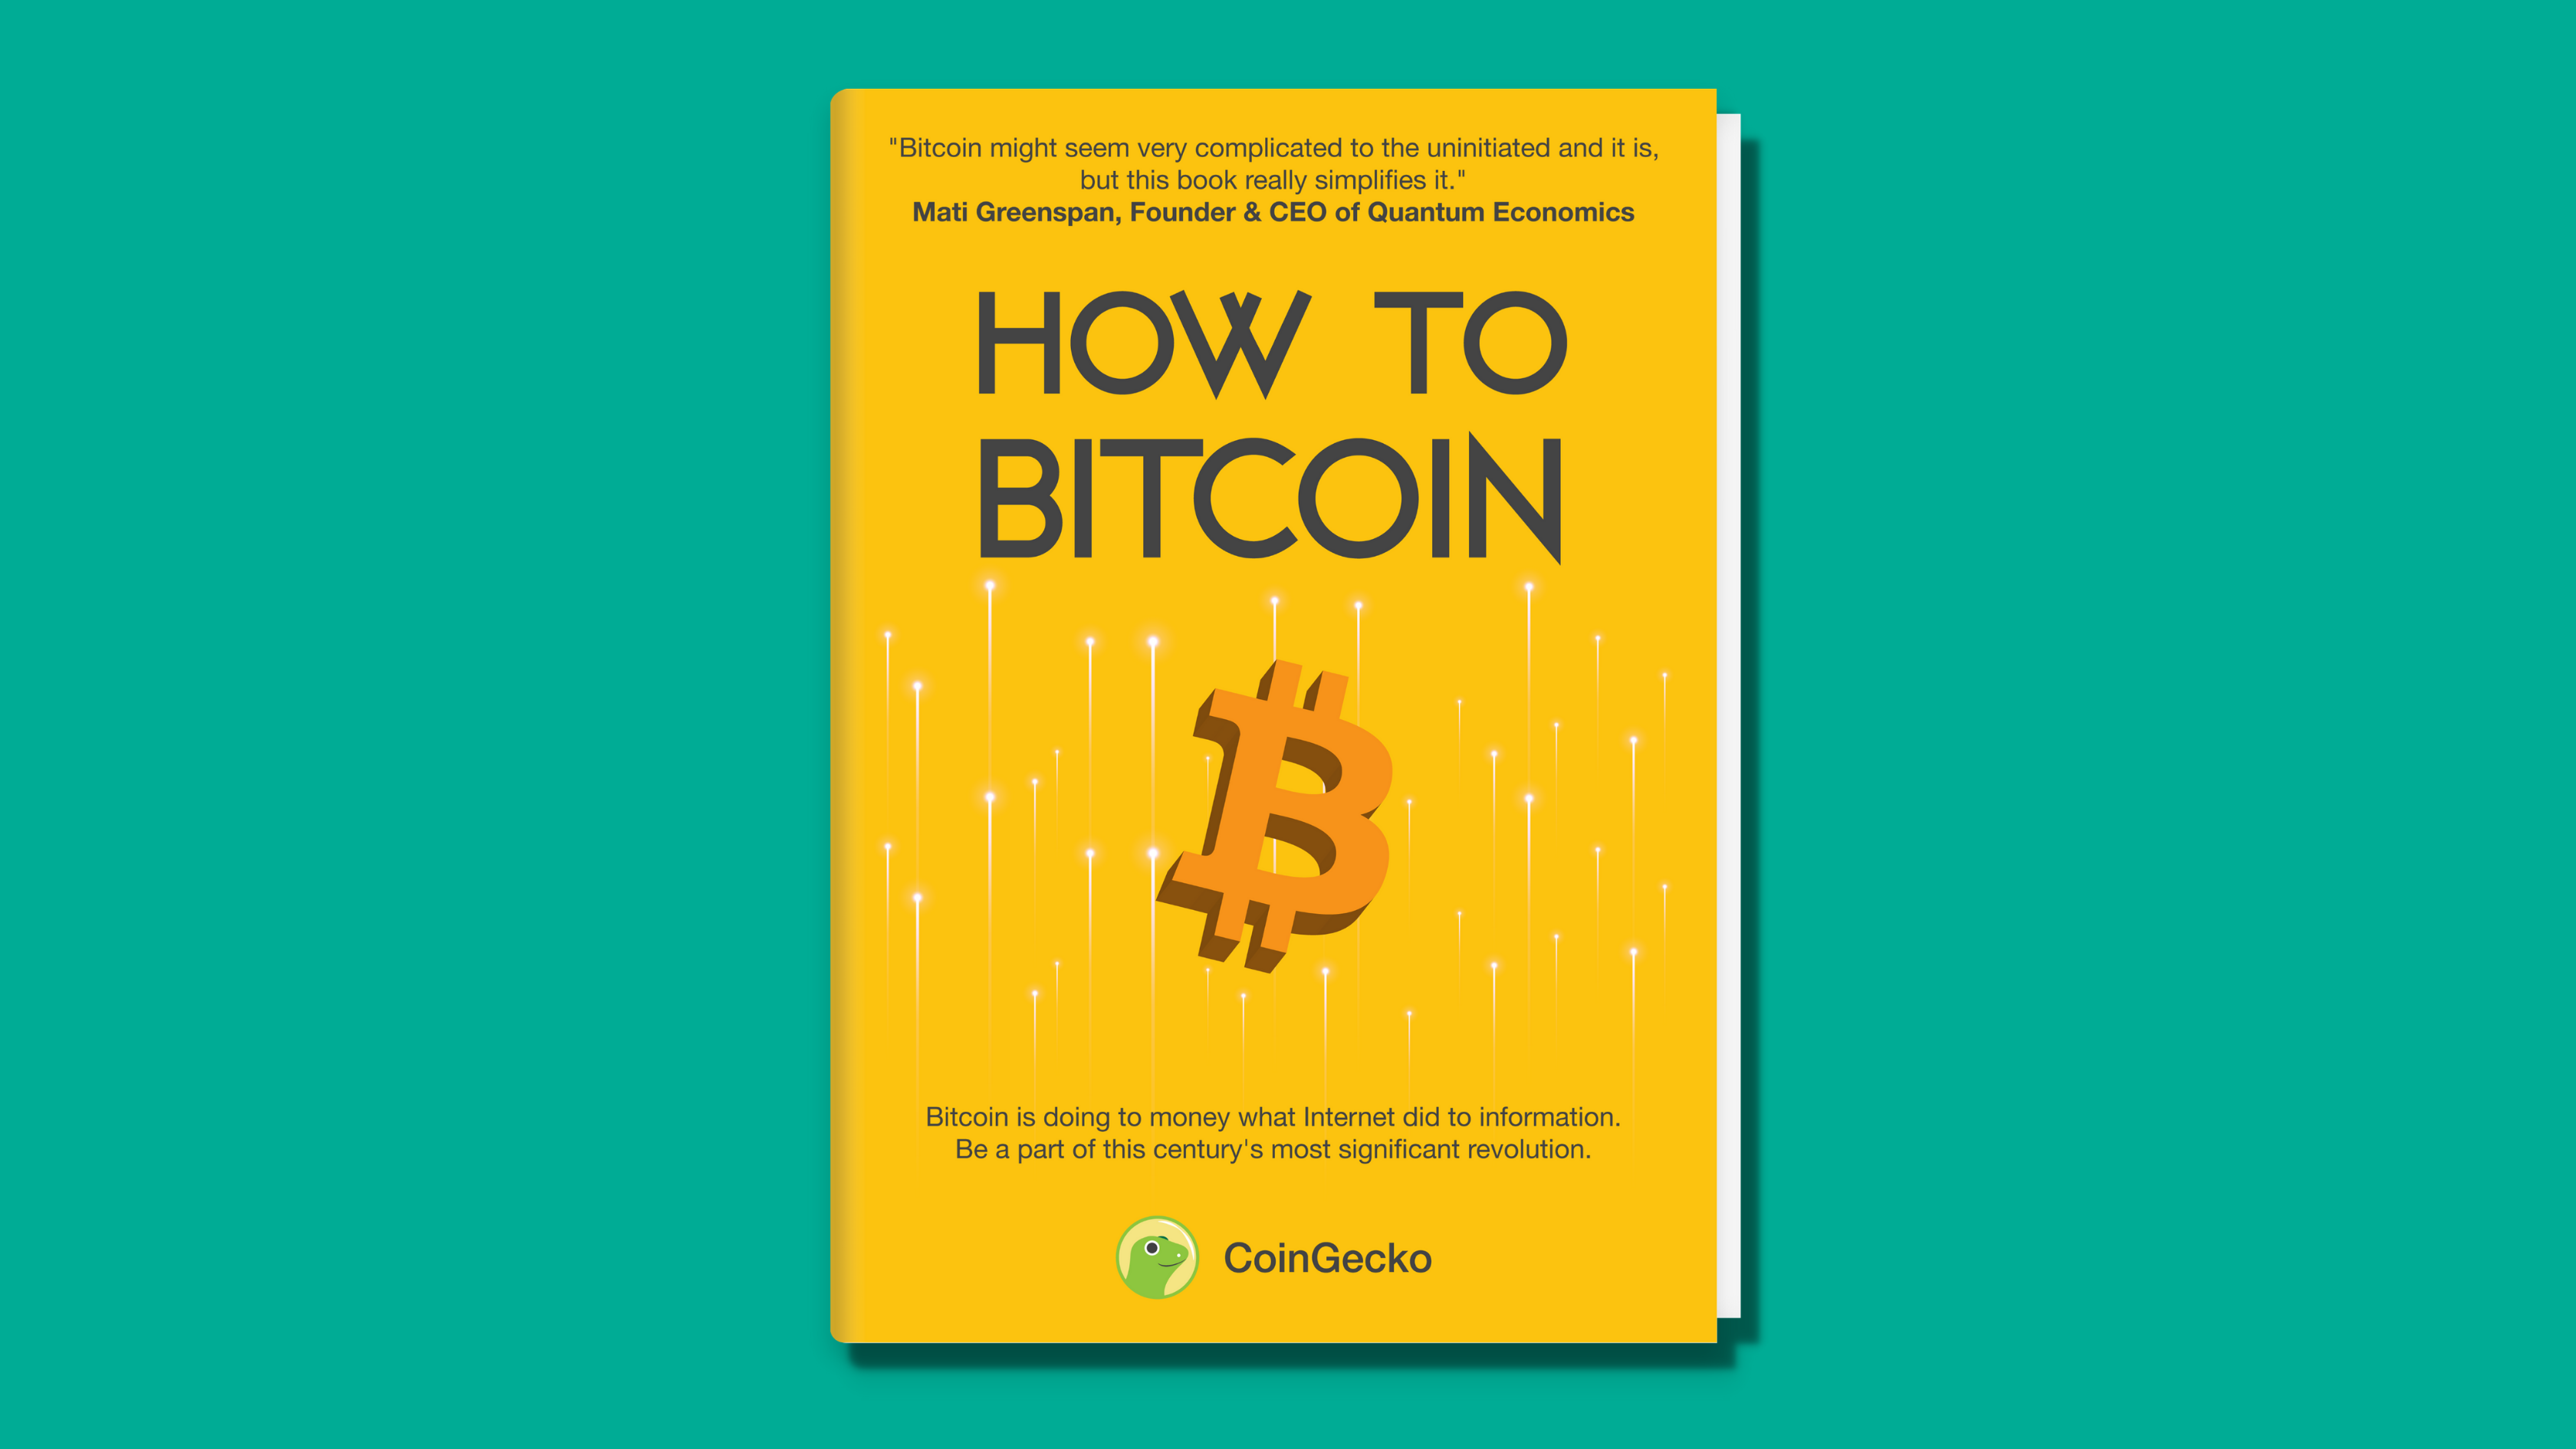 How To Bitcoin book